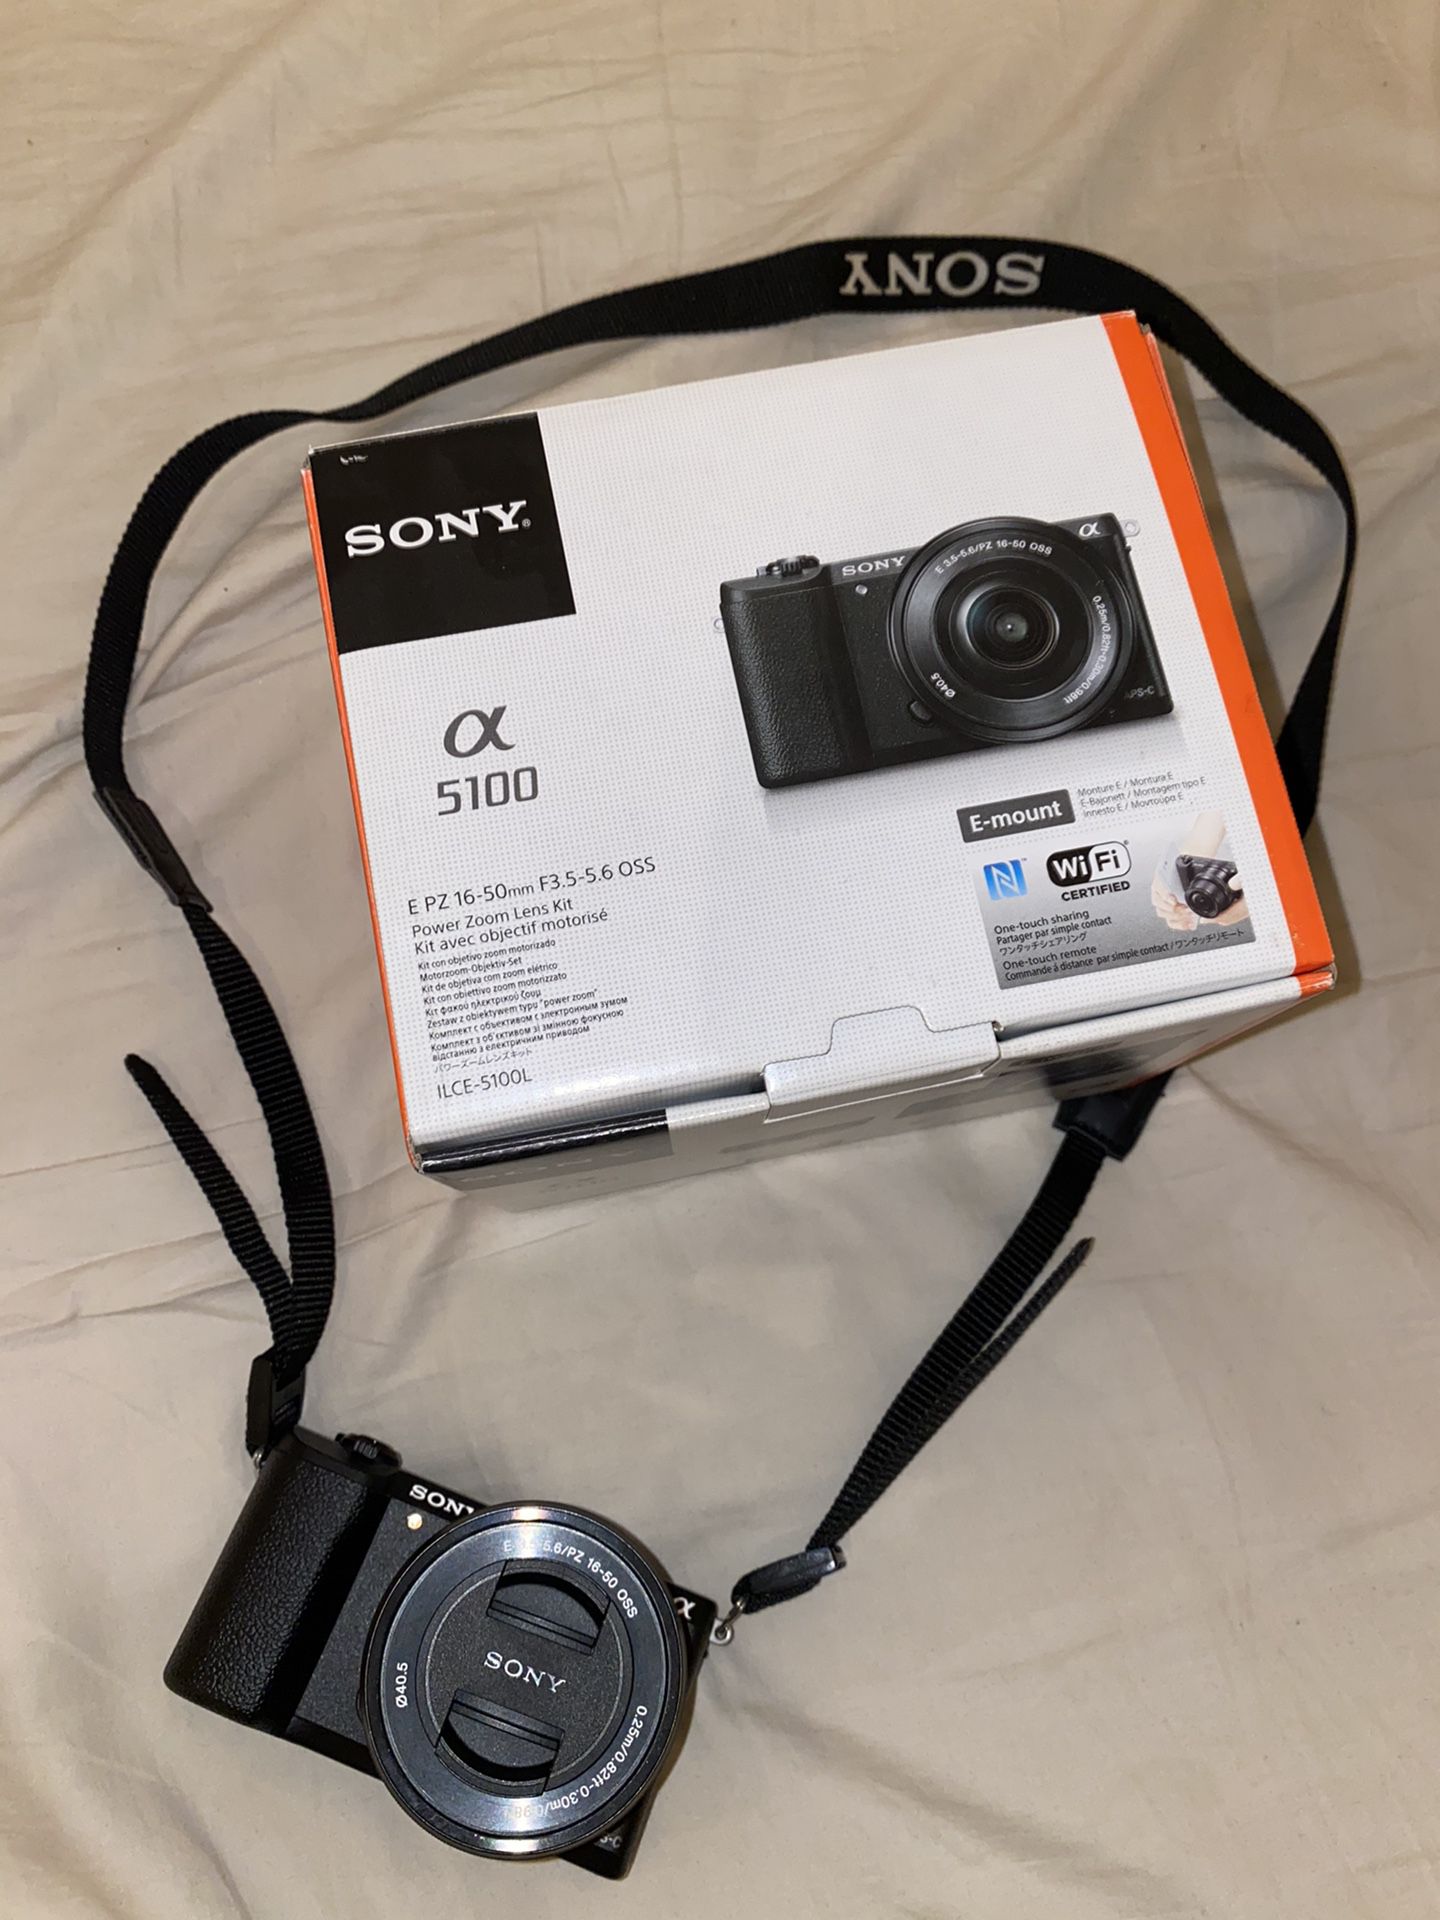 *NEW* Sony a5100 16-50mm Interchangeable Lens Camera with 3-Inch Flip Up LCD (Black) $380 OR BEST OFFER (Retail price is $482 on Amazon)